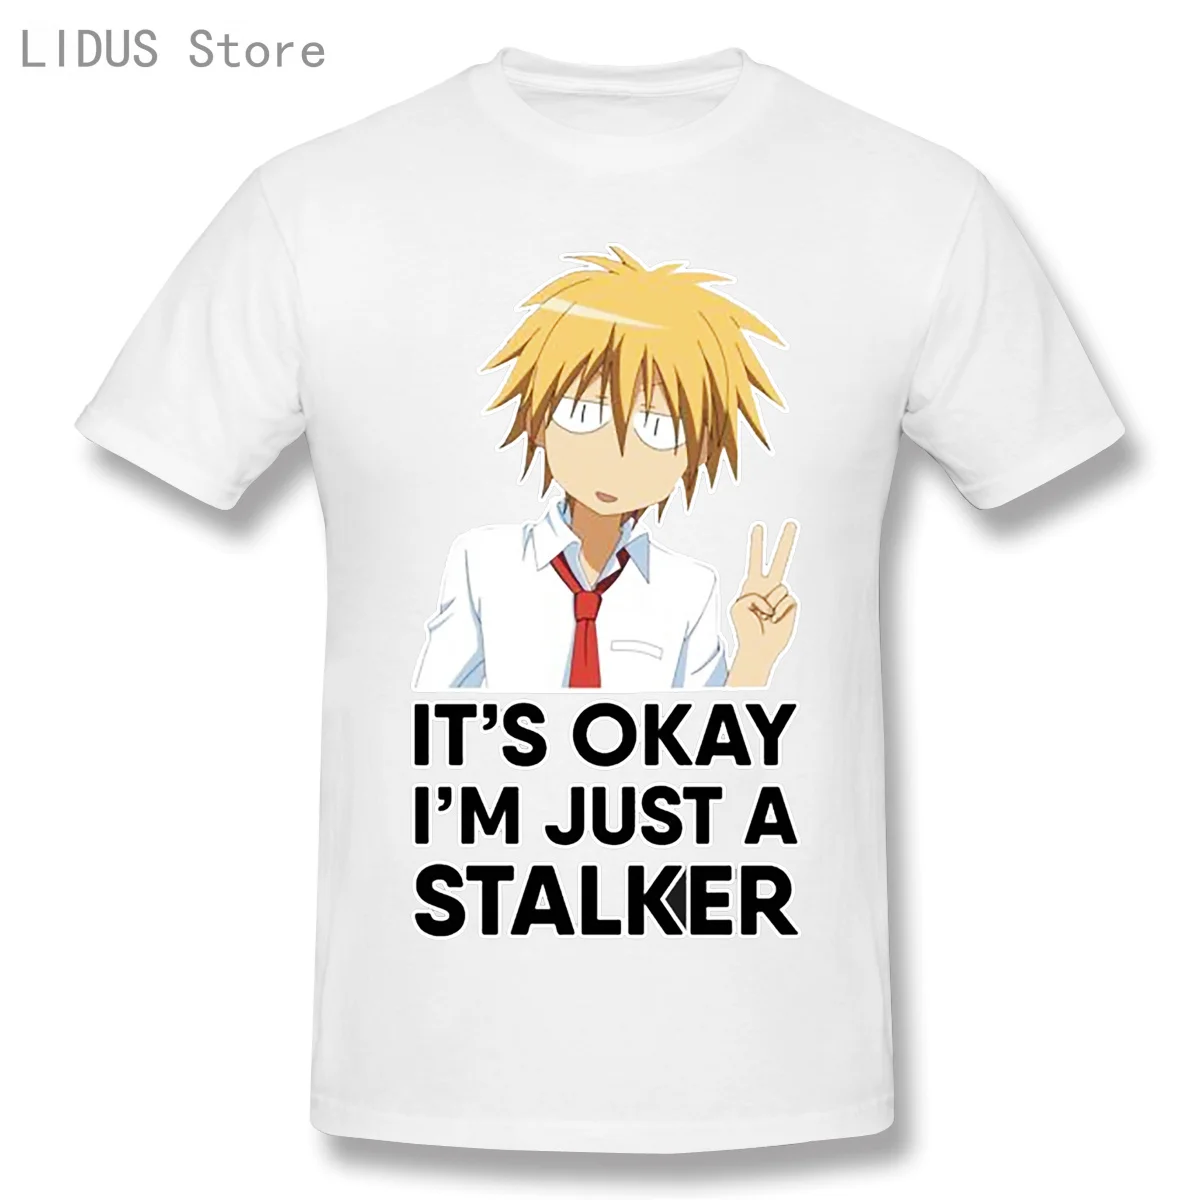 

Funny Anime Tshirt For Men T-Shirts Stalker Maid Sama Cotton Tees Short Sleeve Gintama T Shirt Round Collar Clothes Plus Size